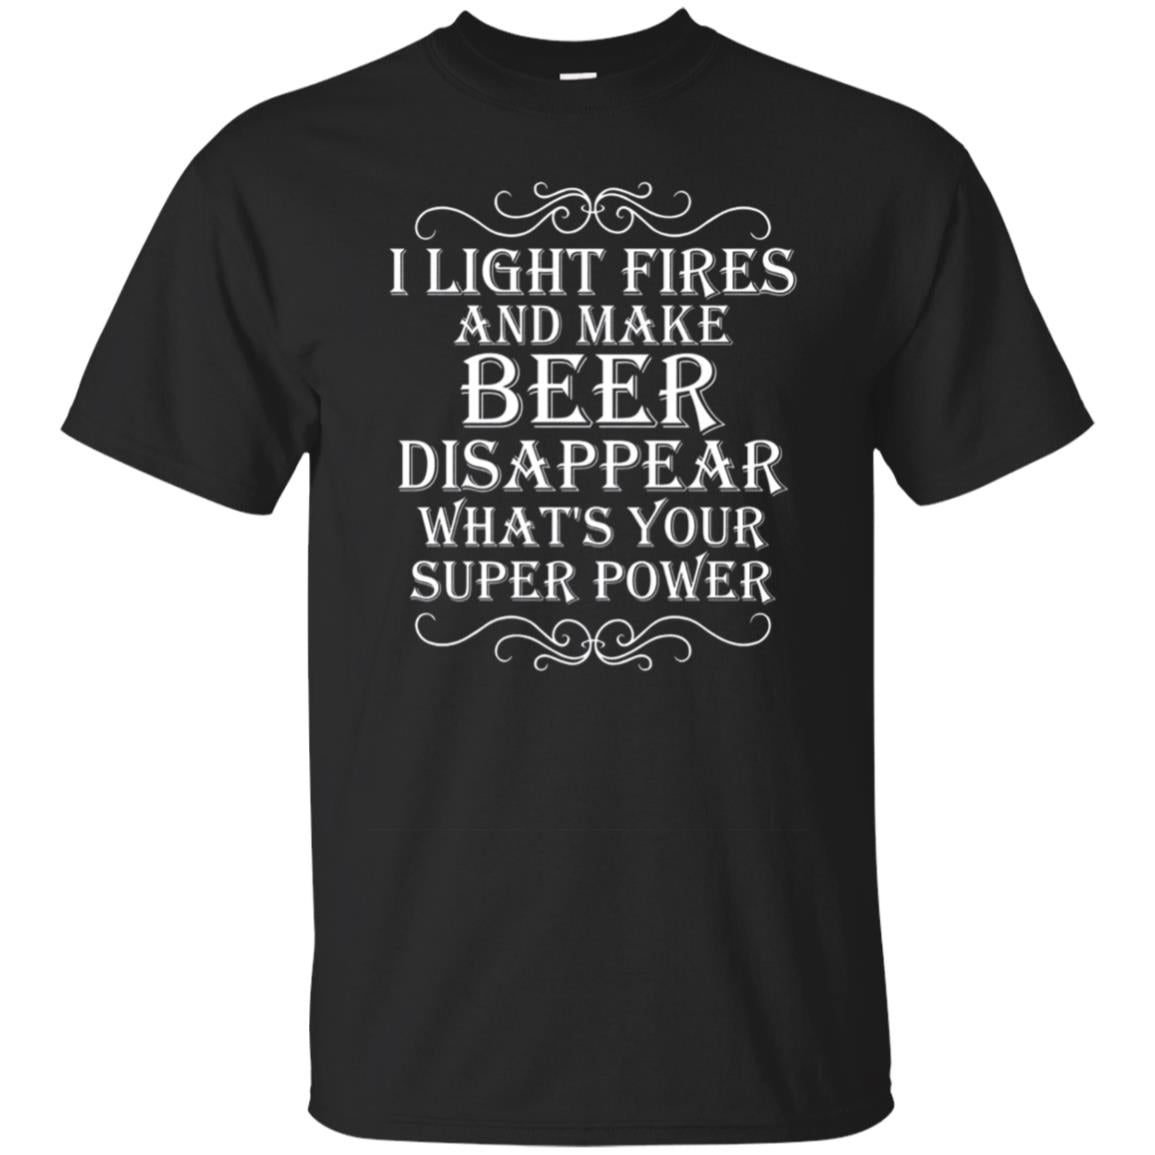 Camping T Shirt I Light Fires And Make Beer Disappear Humor